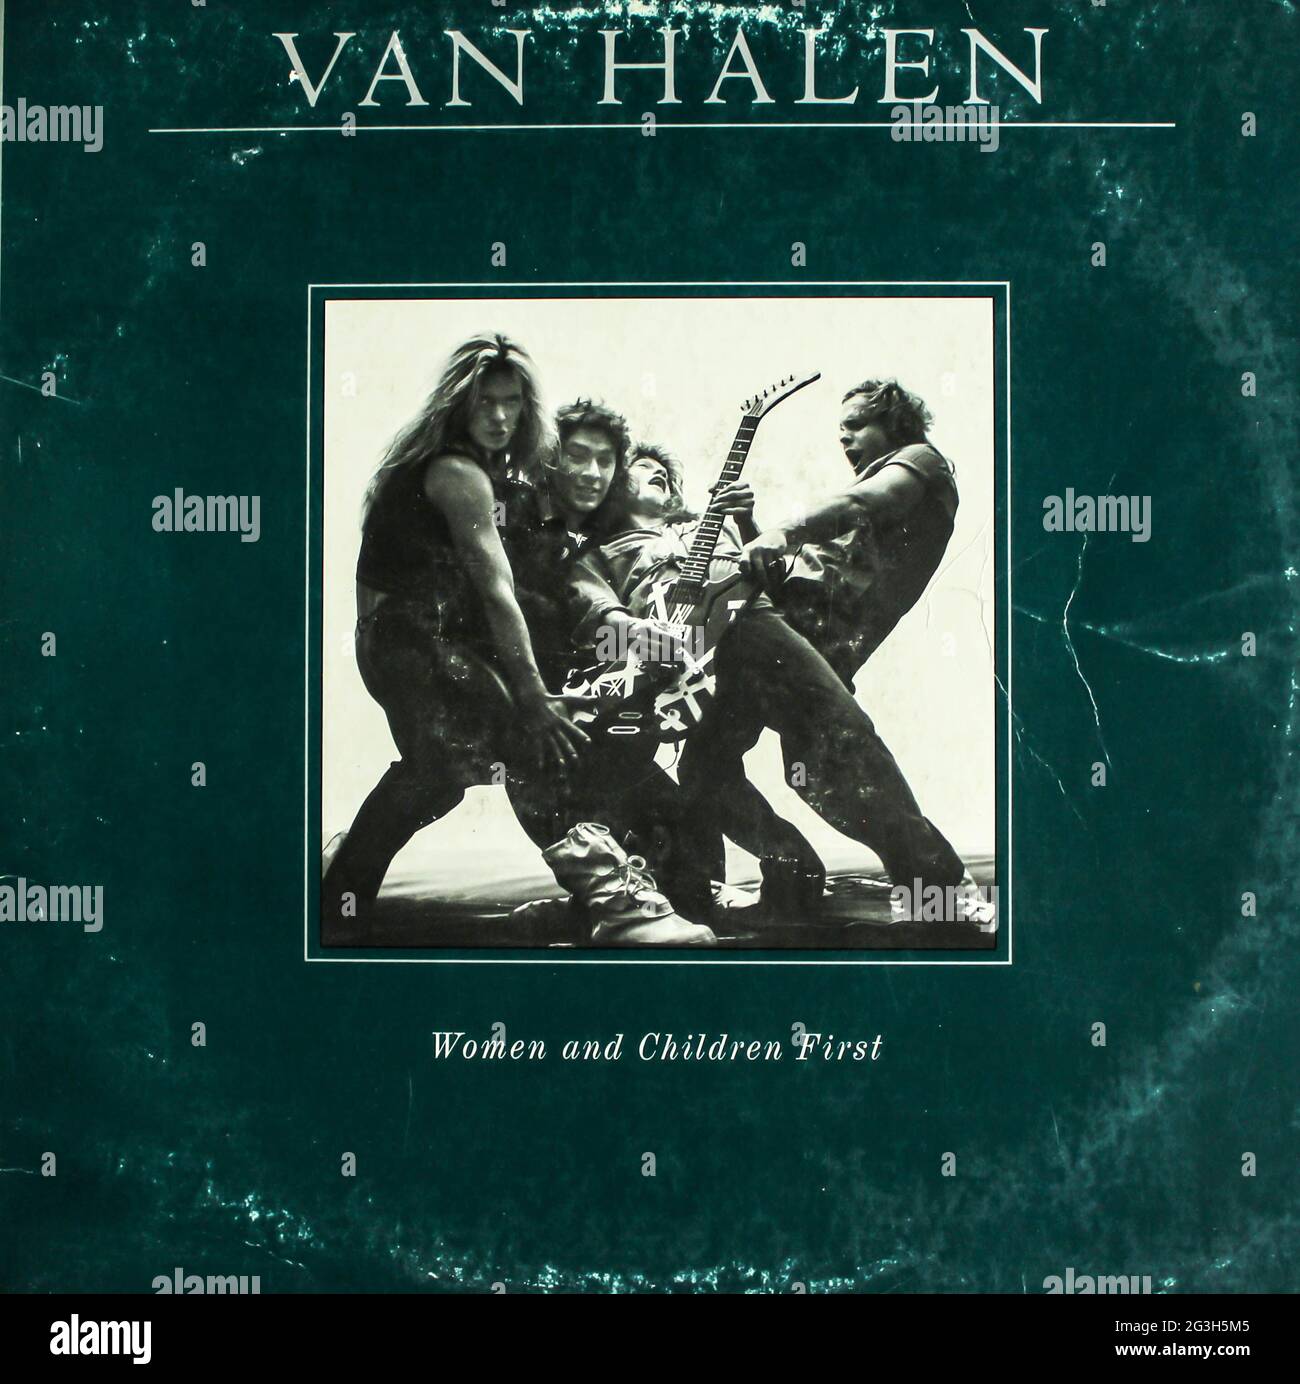 Hard rock, heavy metal and glam metal band, Van Halen music album on vinyl record LP disc.  Titled: Women and Children First album cover Stock Photo